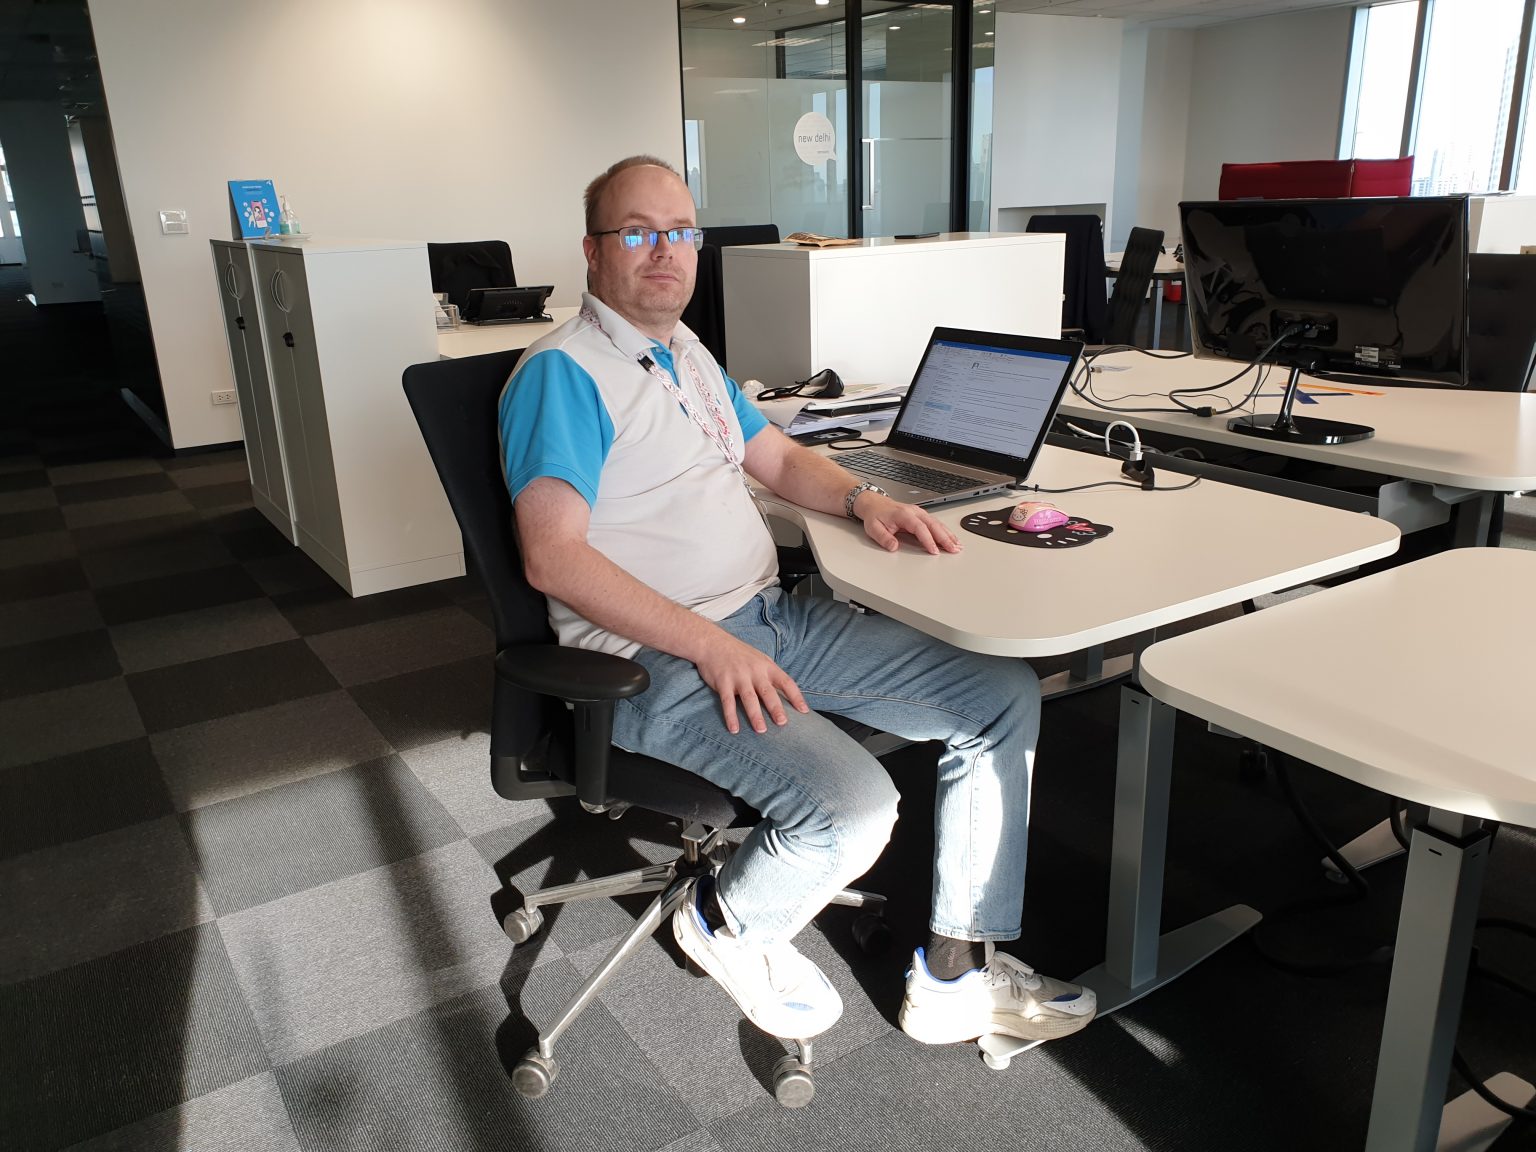 Erik Kvarvåg, Chief IT/NFVi Infrastructure & Security Architect (pictured) and Ståle Pedersen, Senior Security Advisor in Global Business Security at Telenor has authored this fourth and final article in our series about defendable architecture.